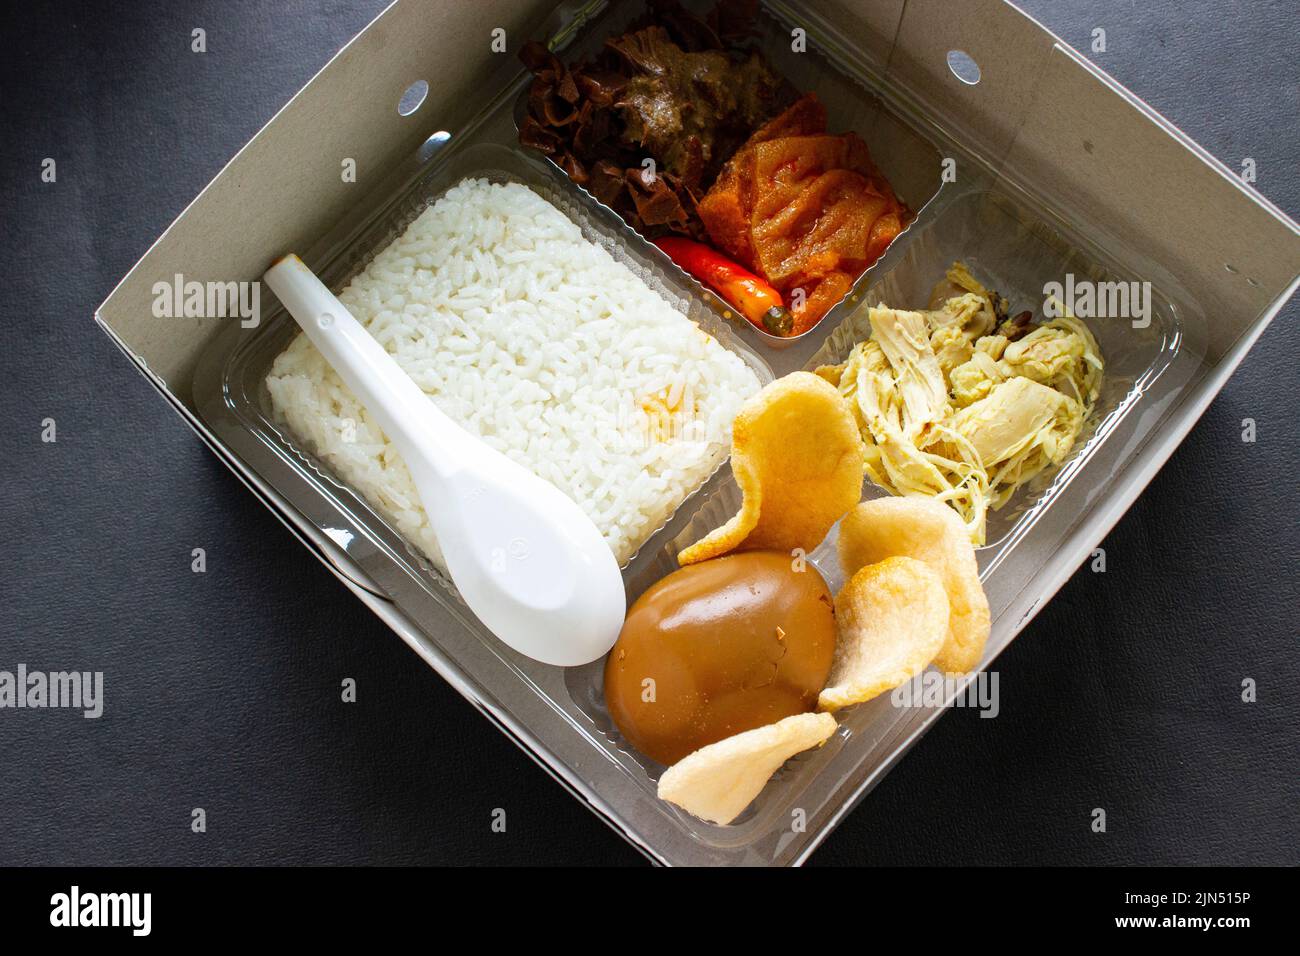 lunch boxes gudeg are similar to Bento boxes - rice boxes, rice, catering boxes, food services (rice warm, sweet eggs, krecek, tofu, tempeh, pieces of Stock Photo